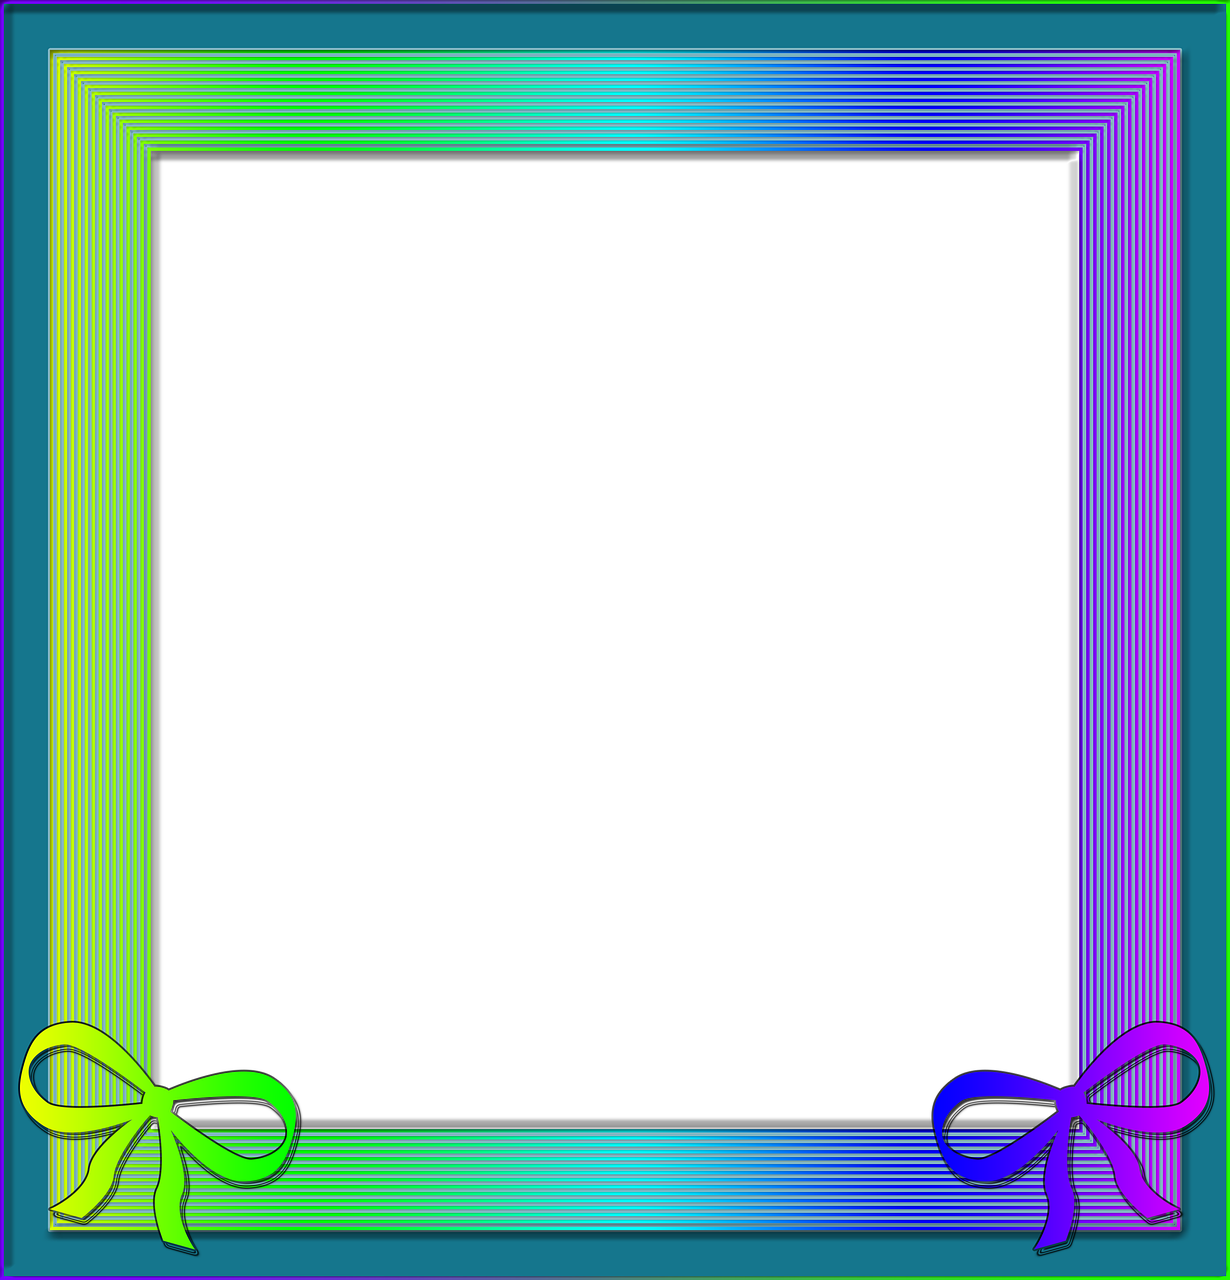 a rainbow colored frame with a bow on it, flickr, computer art, black blue green, no gradients, square pictureframes, black backround. inkscape